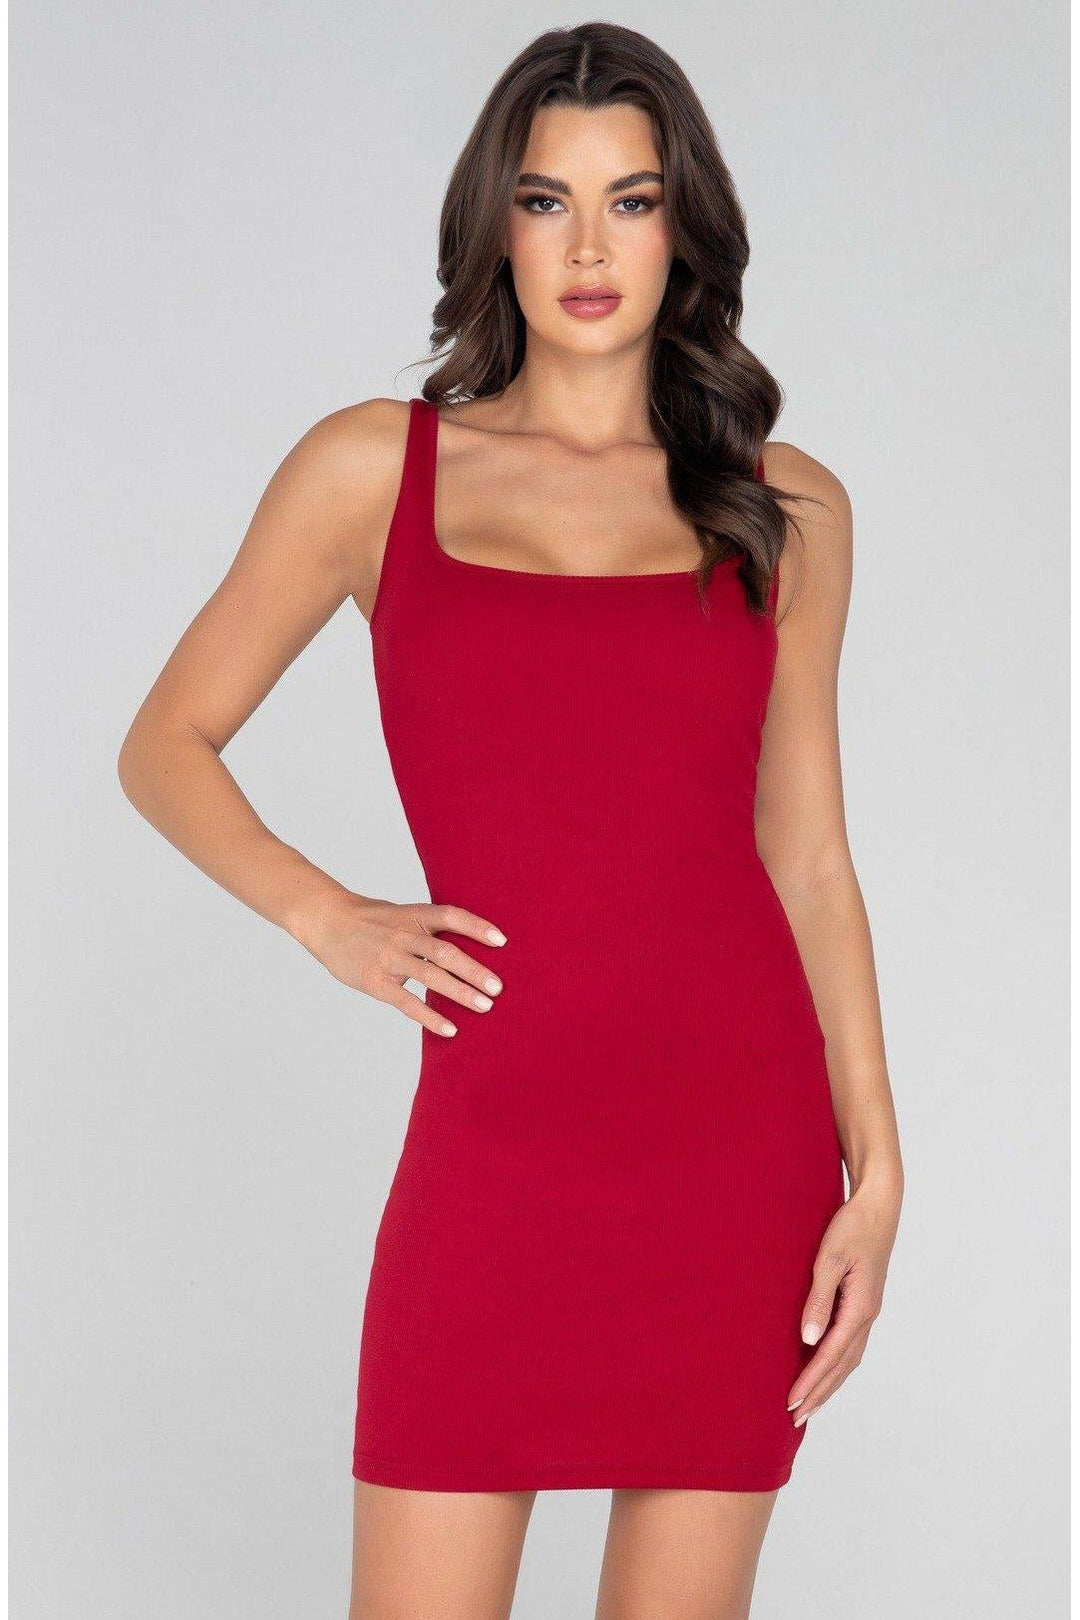 Basic Above The Knee Ribbed Dress-Club Dresses-Roma Confidential-Red-L-SEXYSHOES.COM